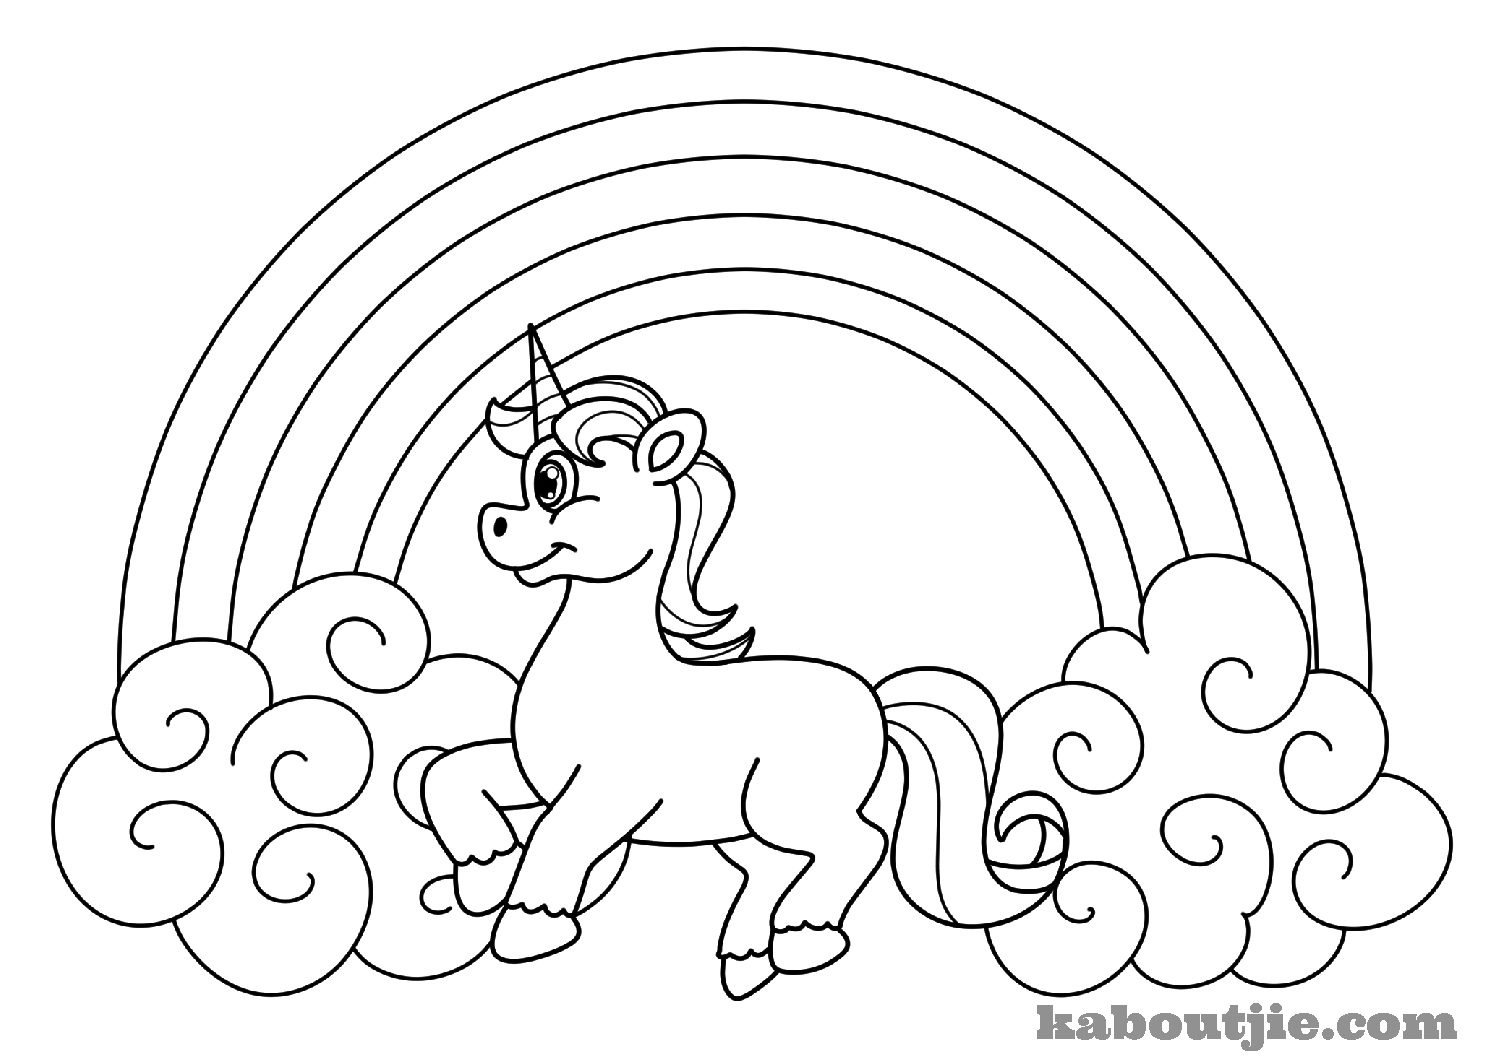 Free-Printable-Unicorn-Coloring-Page | Kaboutjie - Free Printable Unicorn Coloring Pages